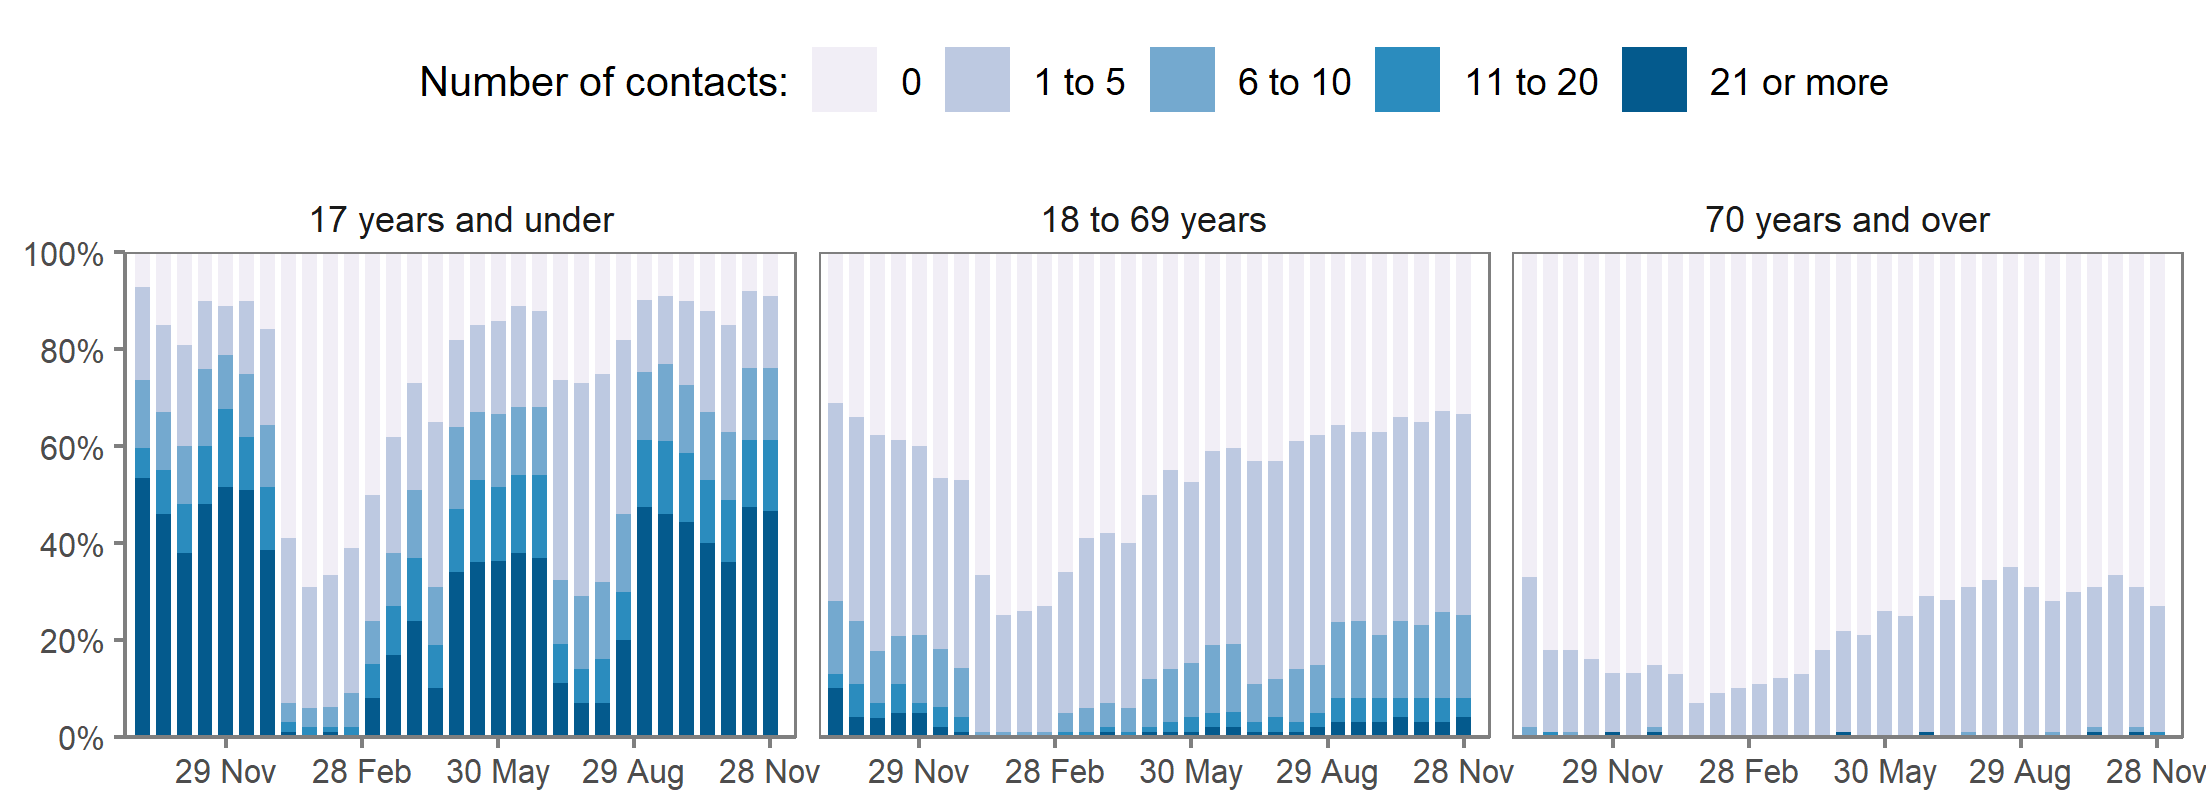 The proportions of school-age children reporting each category of number of physical contacts (0, 1 to 5, 6 to 10, 11 to 20, and 21 or more contacts) is shown in Figure 1.  Children appear to have consistently had more physical contacts with those under 18 than with those aged 18-69 or over 70s.  Each bar represents one two-week period, denoted by the end date of that period. For example, 28 November 2021 denotes the estimate relating to 15 November to 28 November 2021.